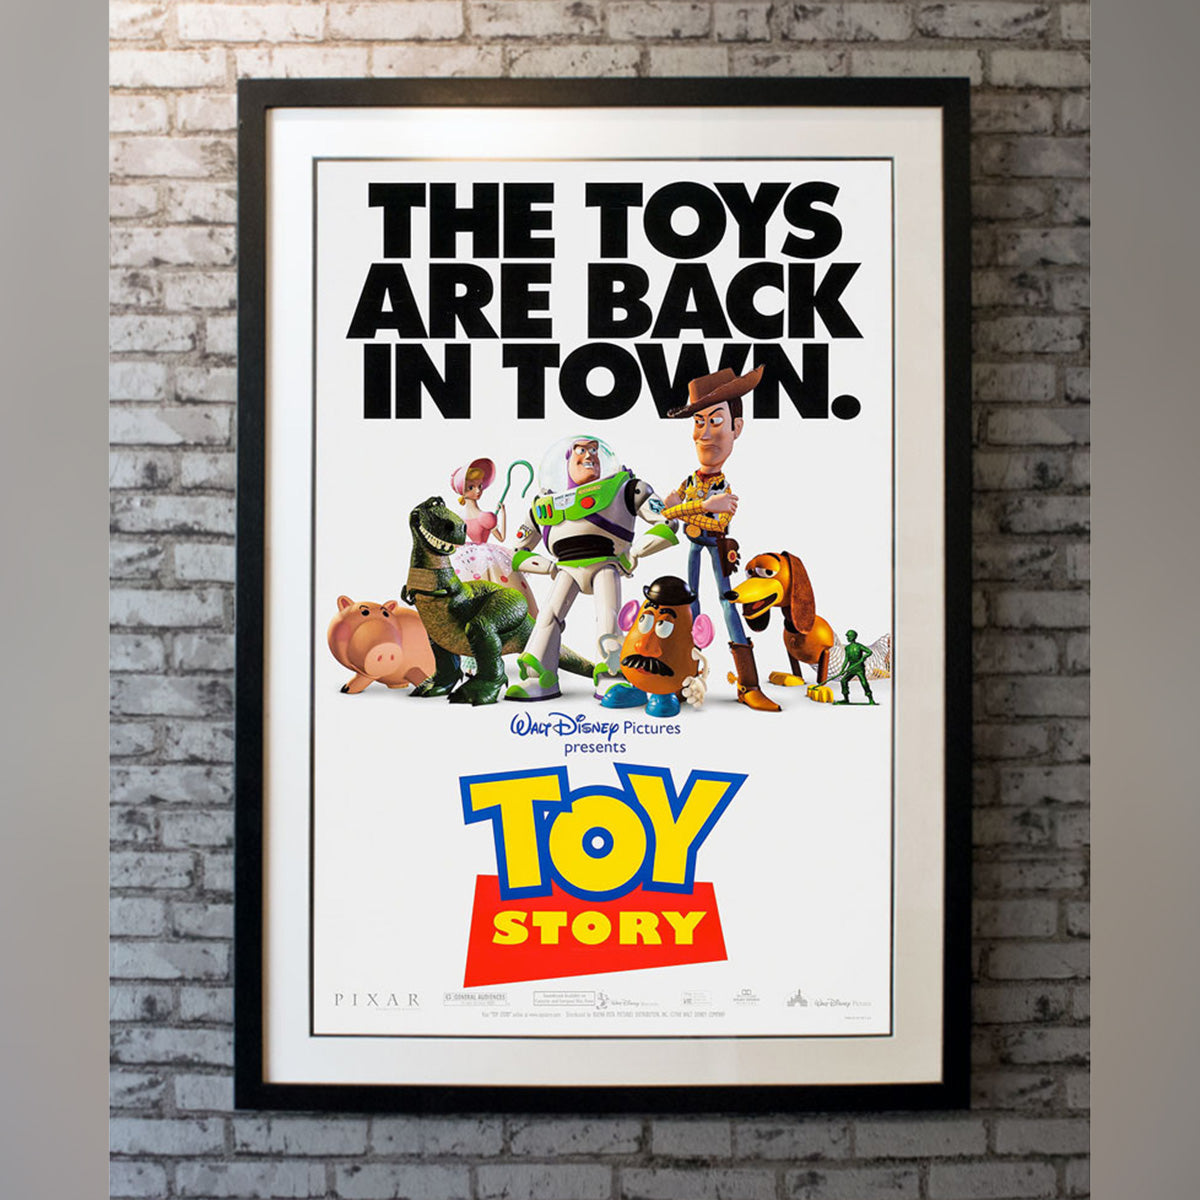 Original Movie Poster of Toy Story (1995)